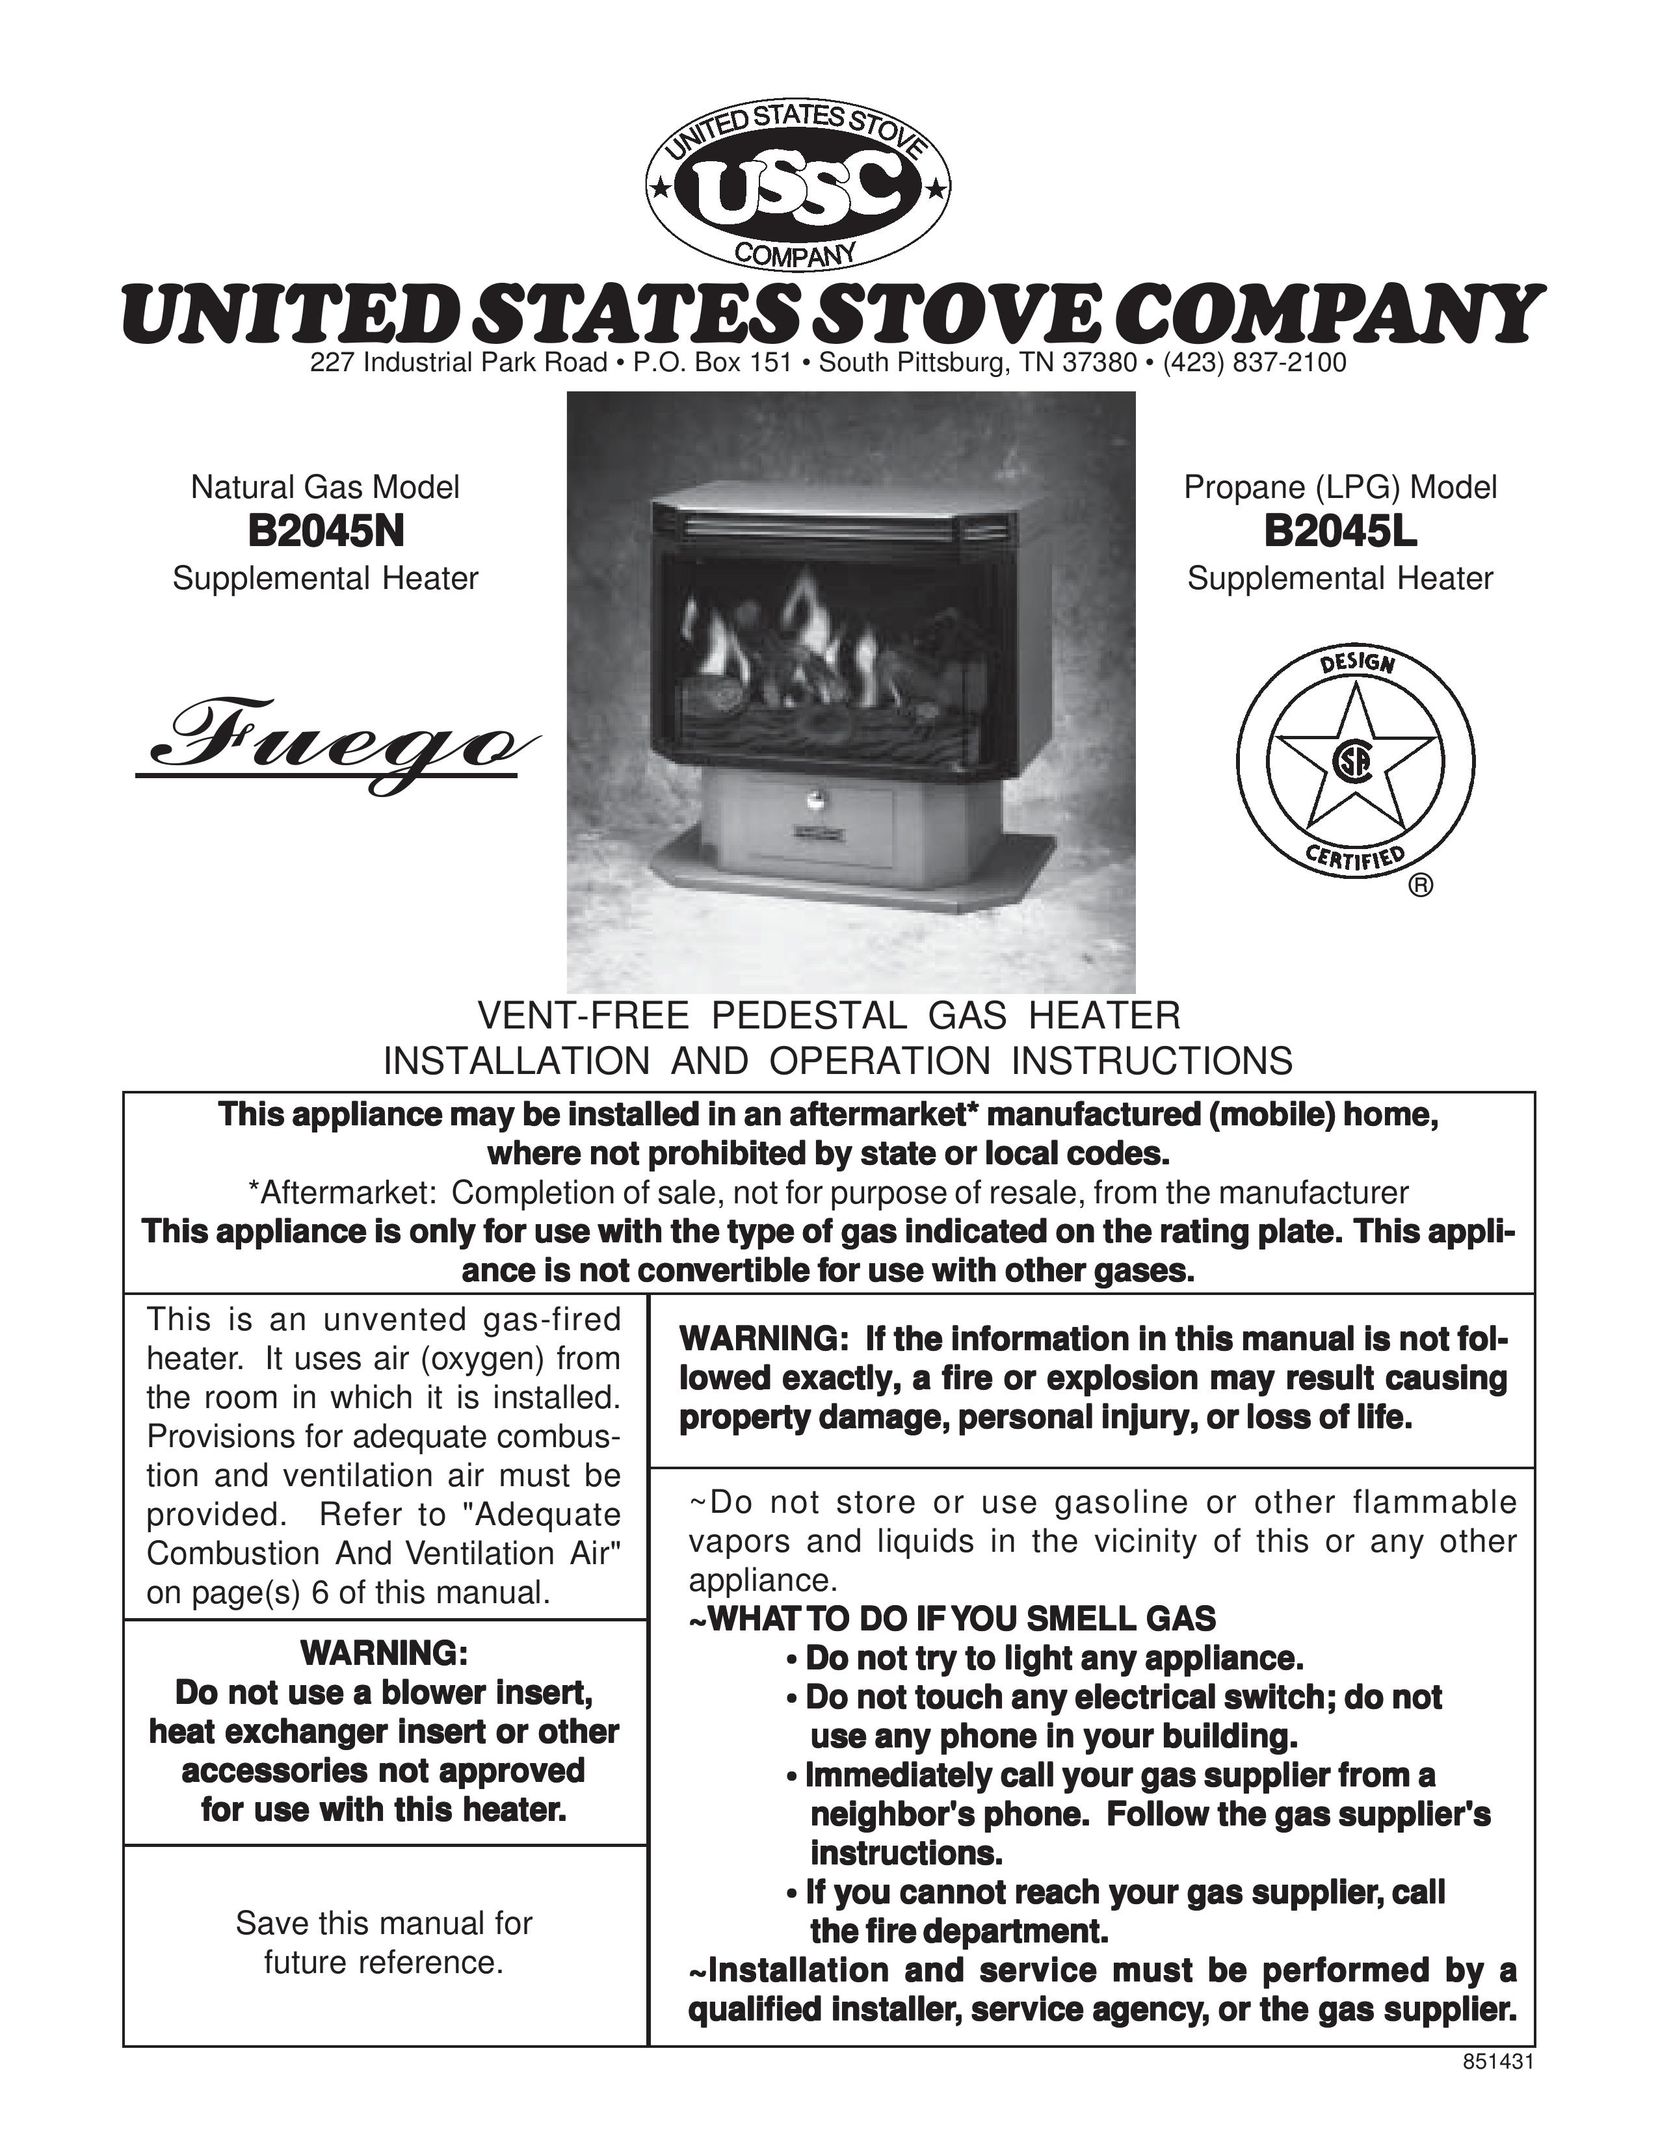 United States Stove B2045L Gas Heater User Manual